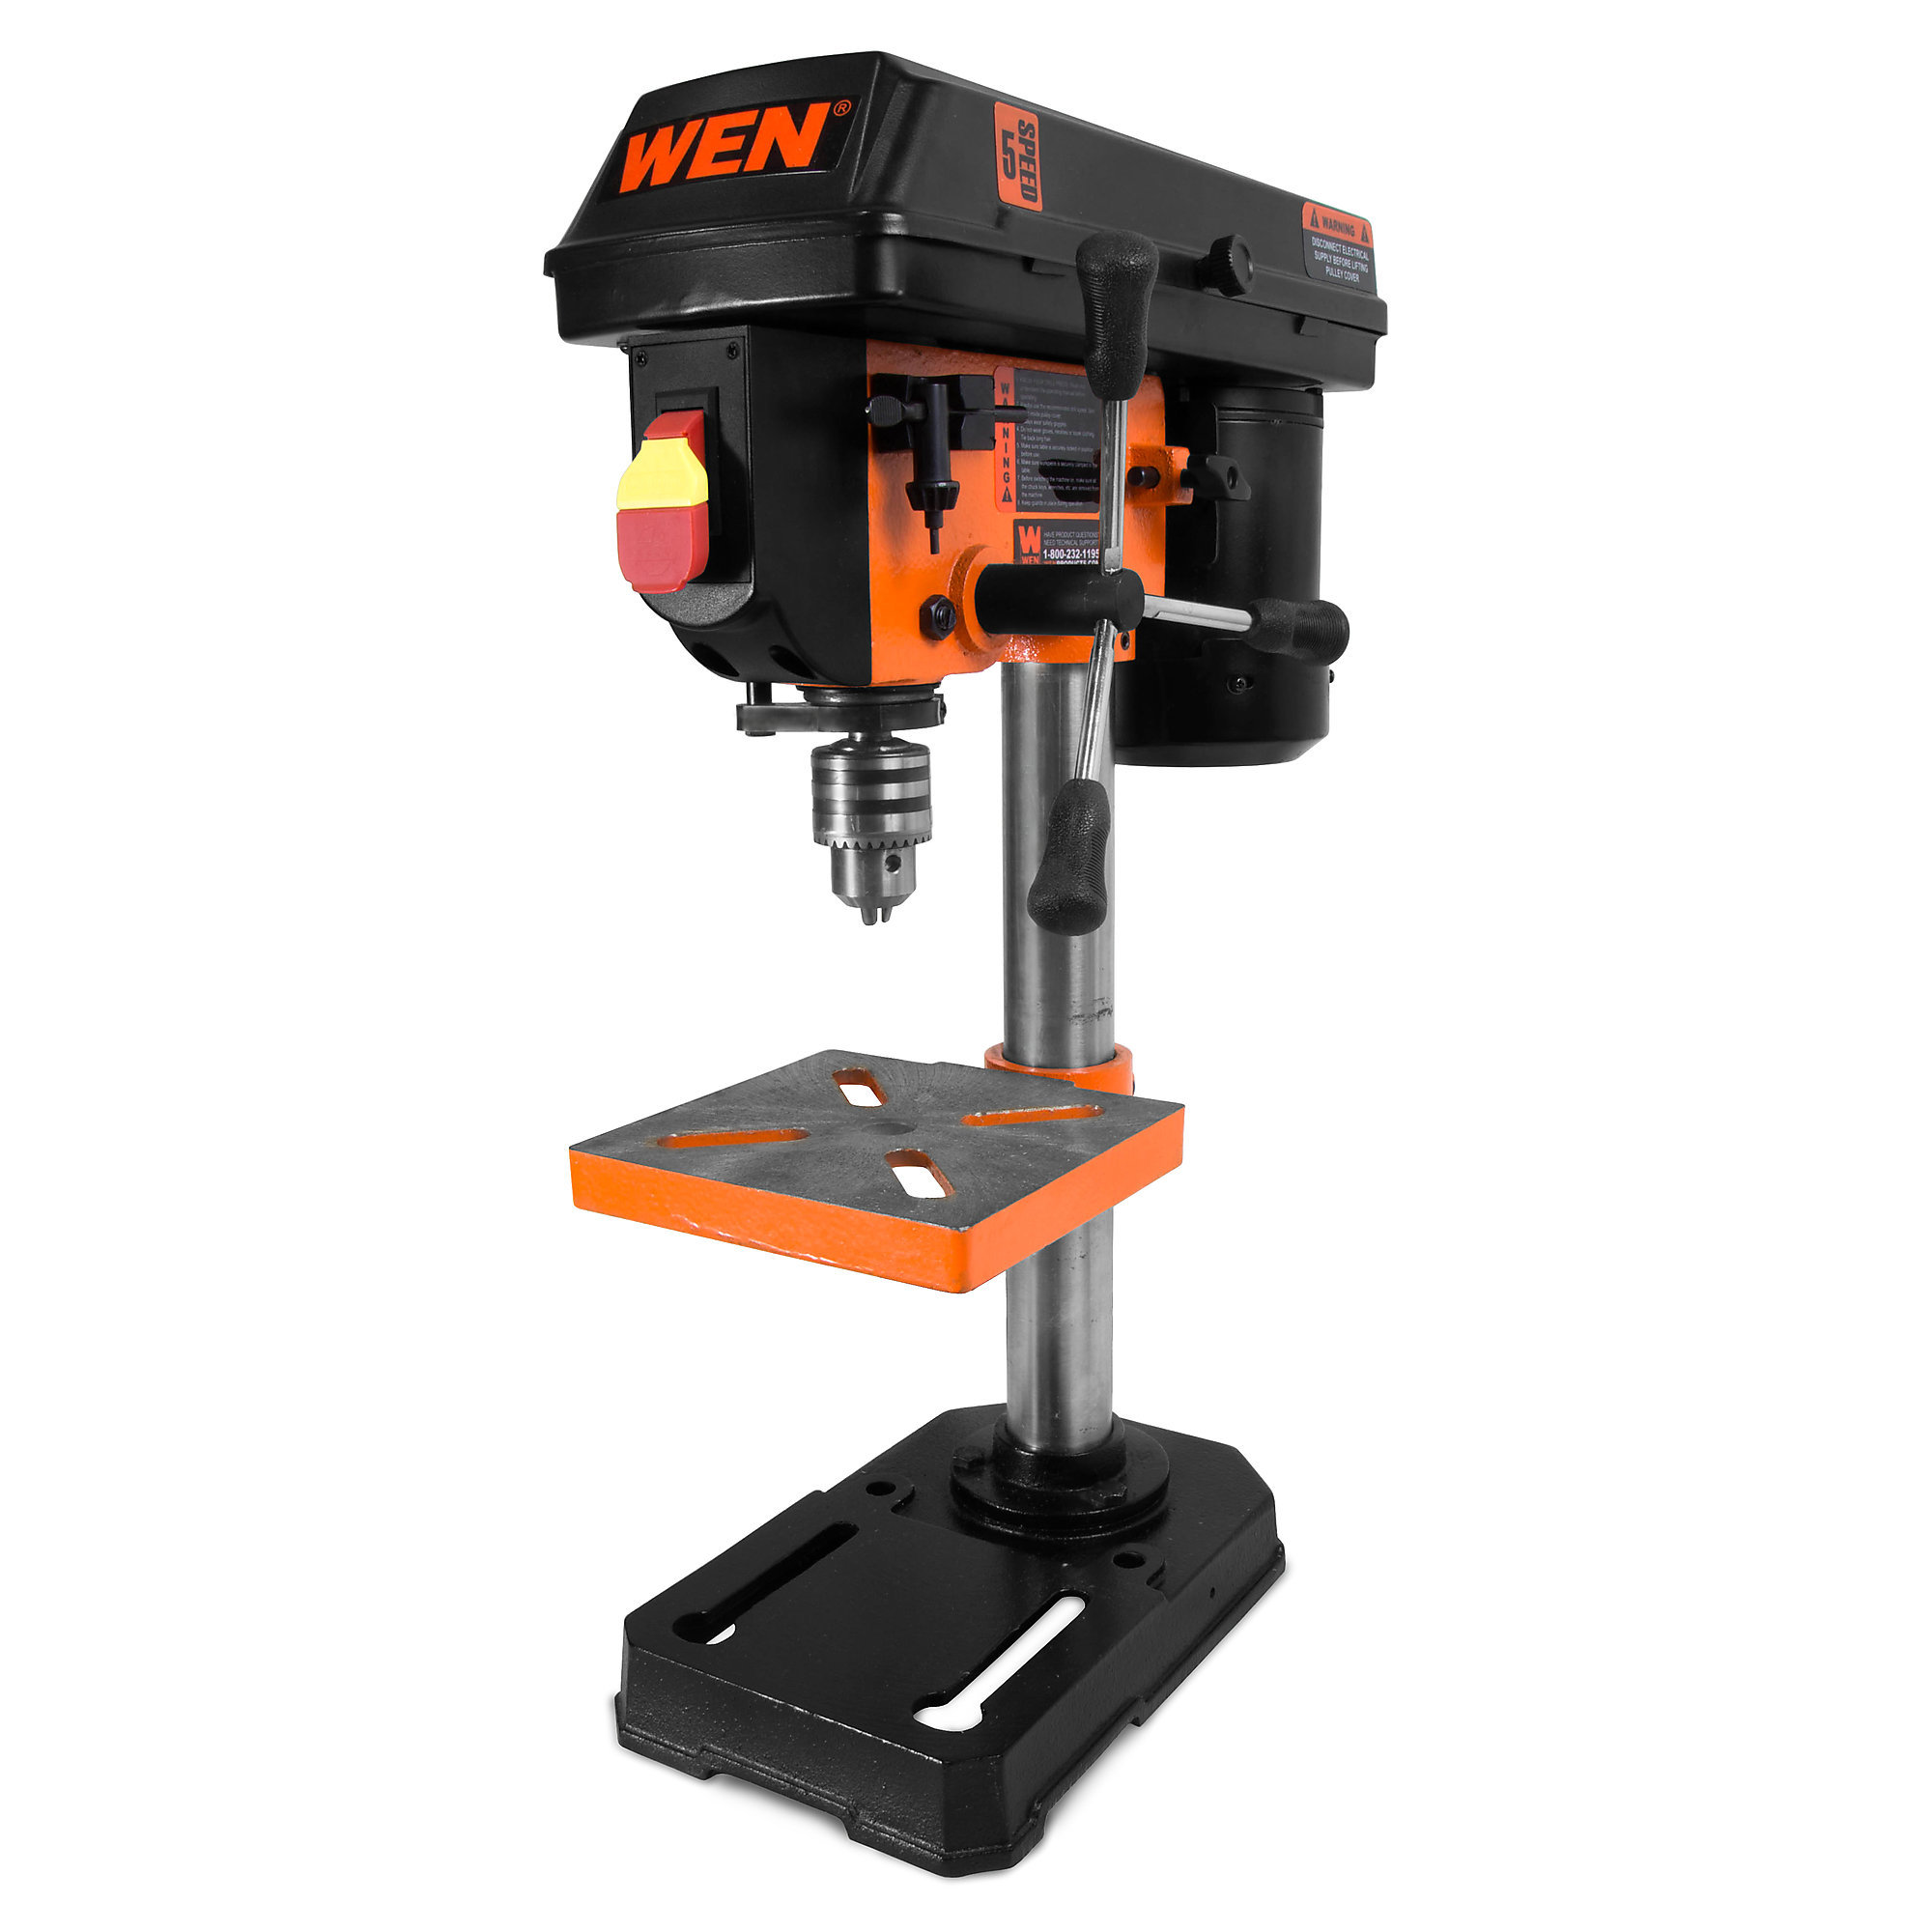 WEN, 8Inch 5-Speed Cast Iron Benchtop Drill Press, Chuck Size 0.5 in, Horsepower 0.37 Model 4208T